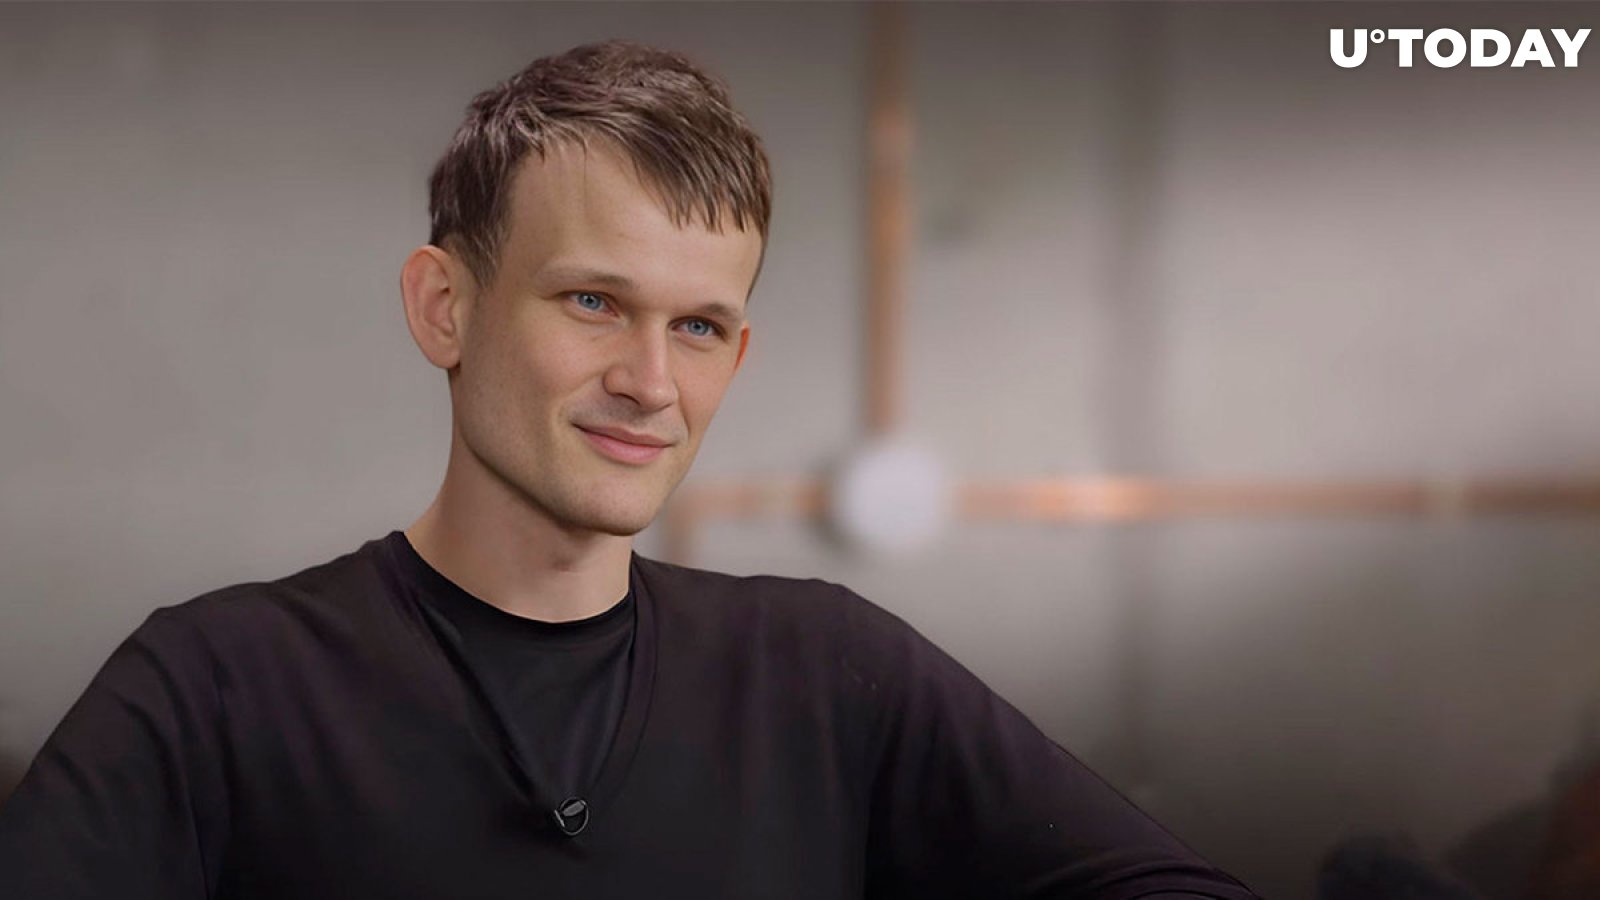 Ethereum Founder Vitalik Buterin: There's Too Much Investment